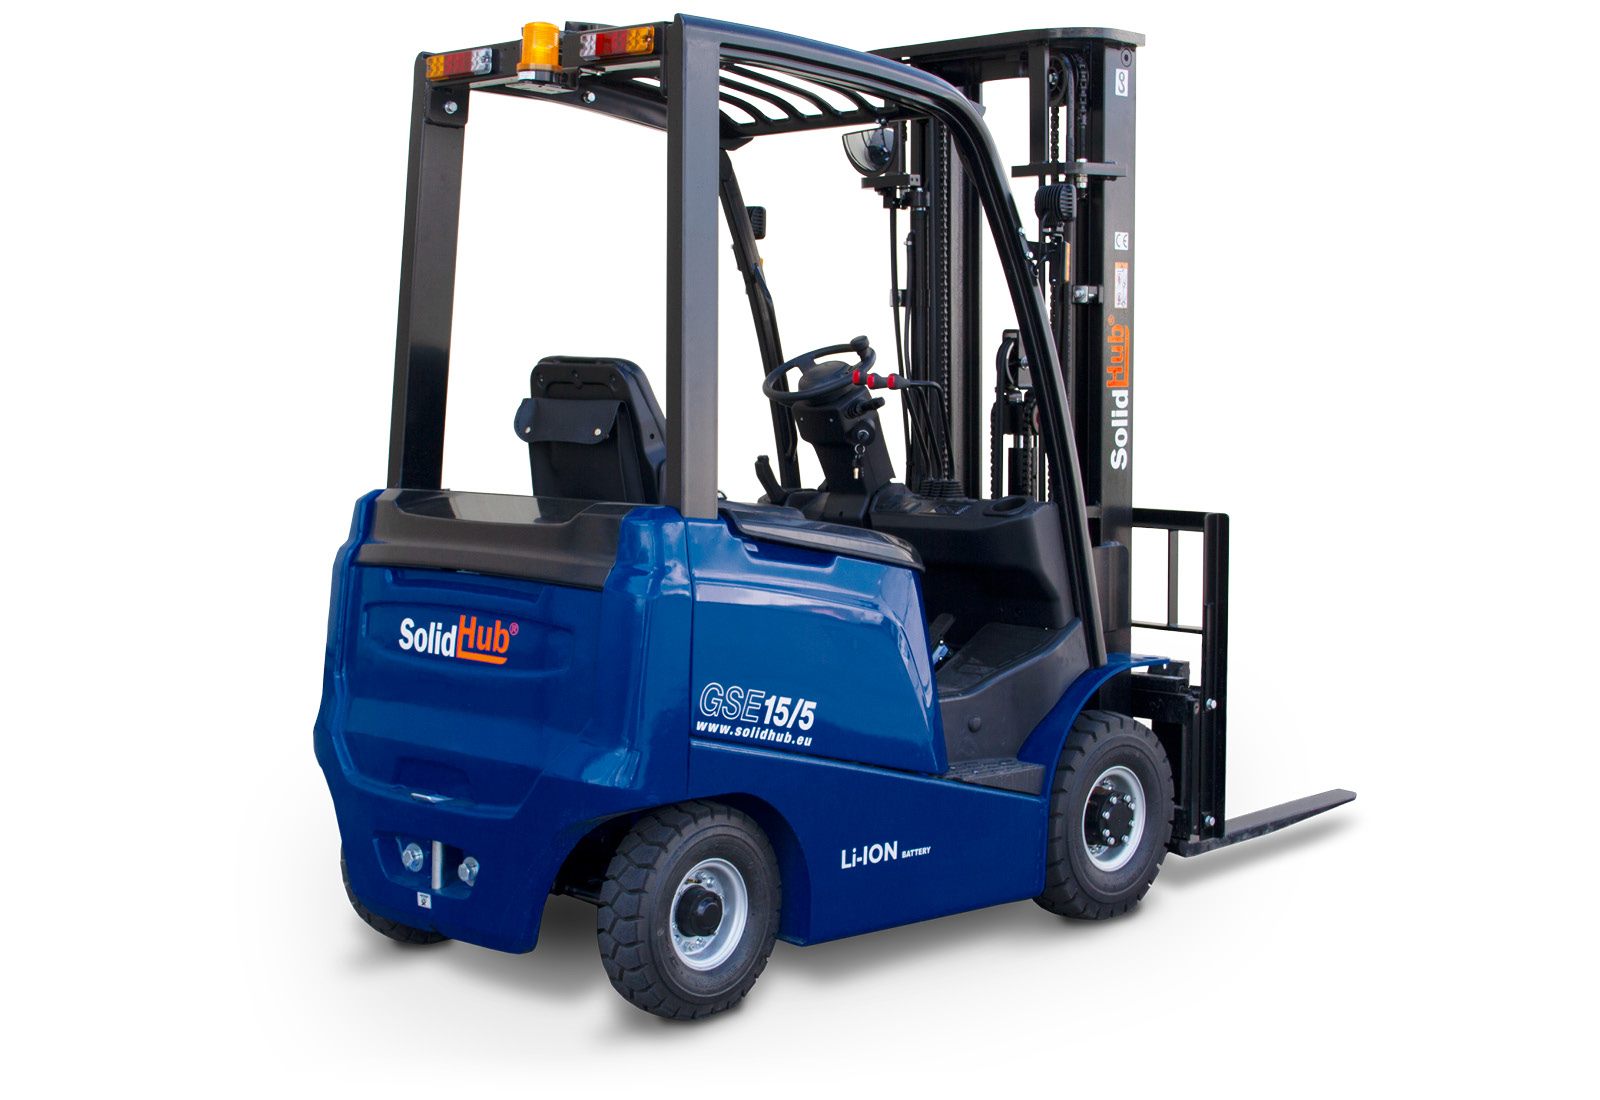 LI-ION Electric Forklift GSE15/5 incl. charger, load capacity 3,307 lbs,  SolidHub